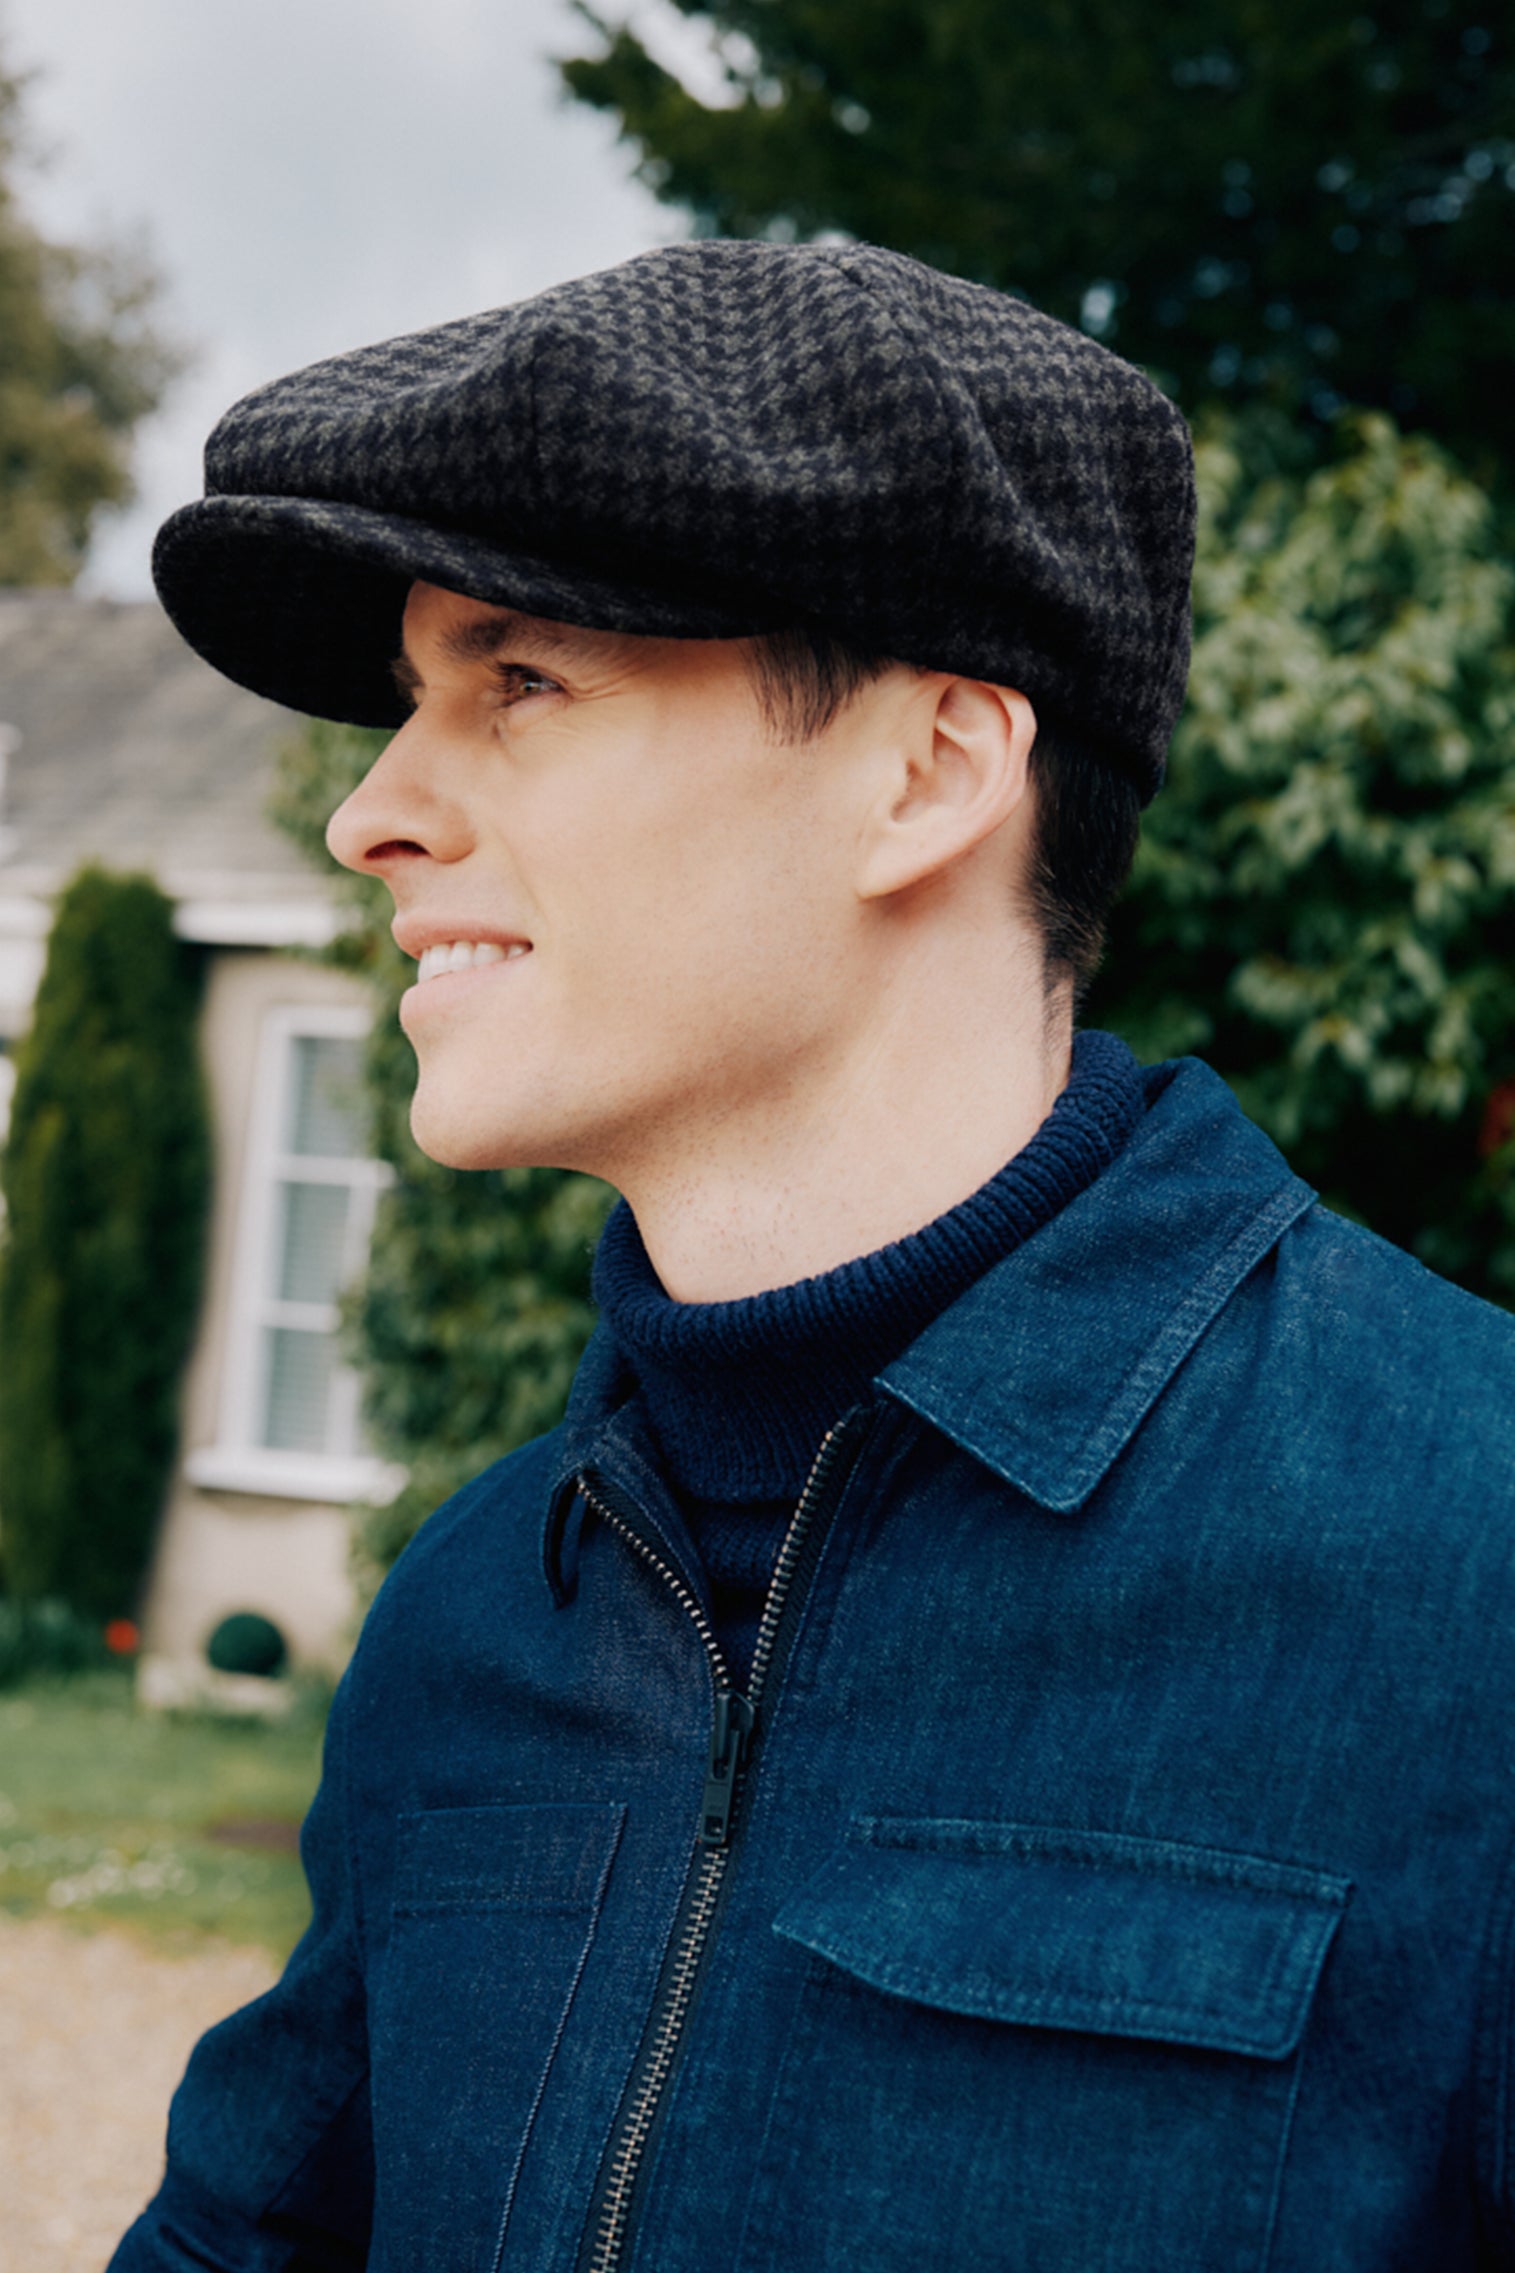 Sandwich Houndstooth Bakerboy Cap - Hats for Square Face Shapes - Lock & Co. Hatters London UK